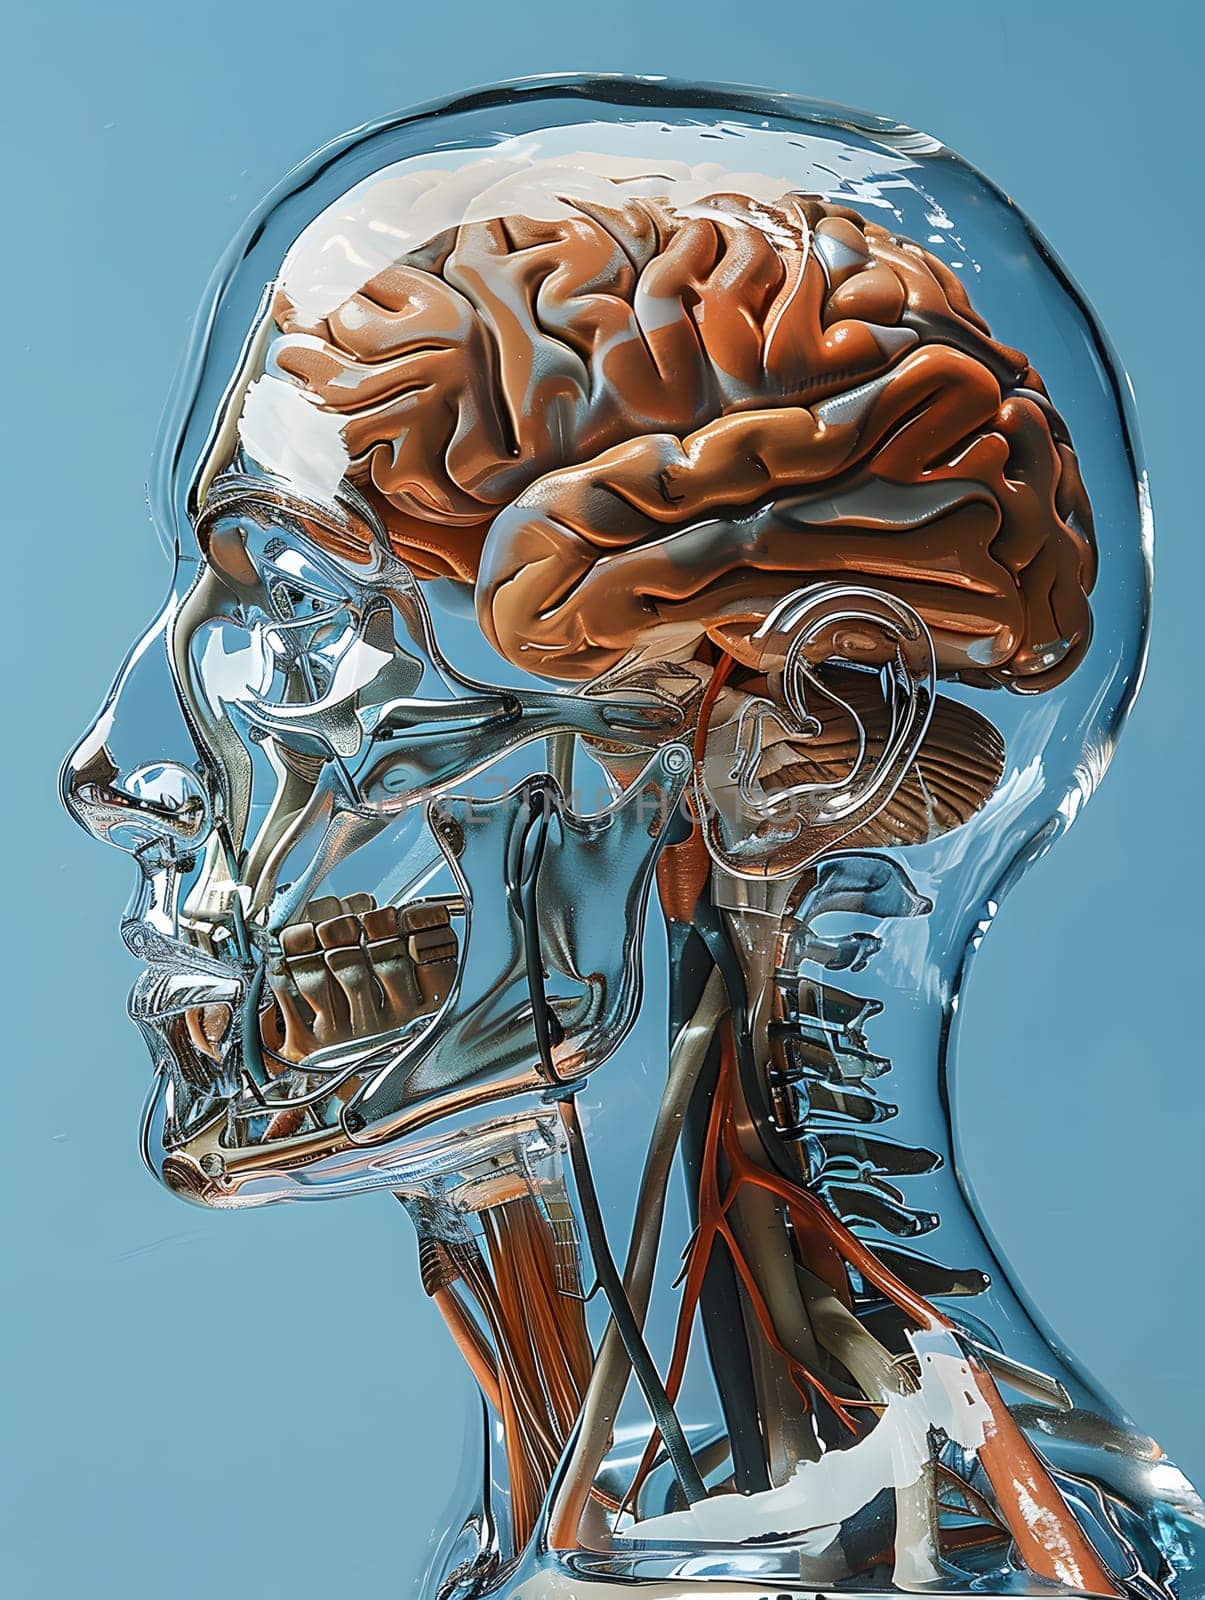 A glass head displaying human anatomy with a brain, muscles, eyes, jaw, and neck. The intricate design includes details like hair, arms, and sleeves